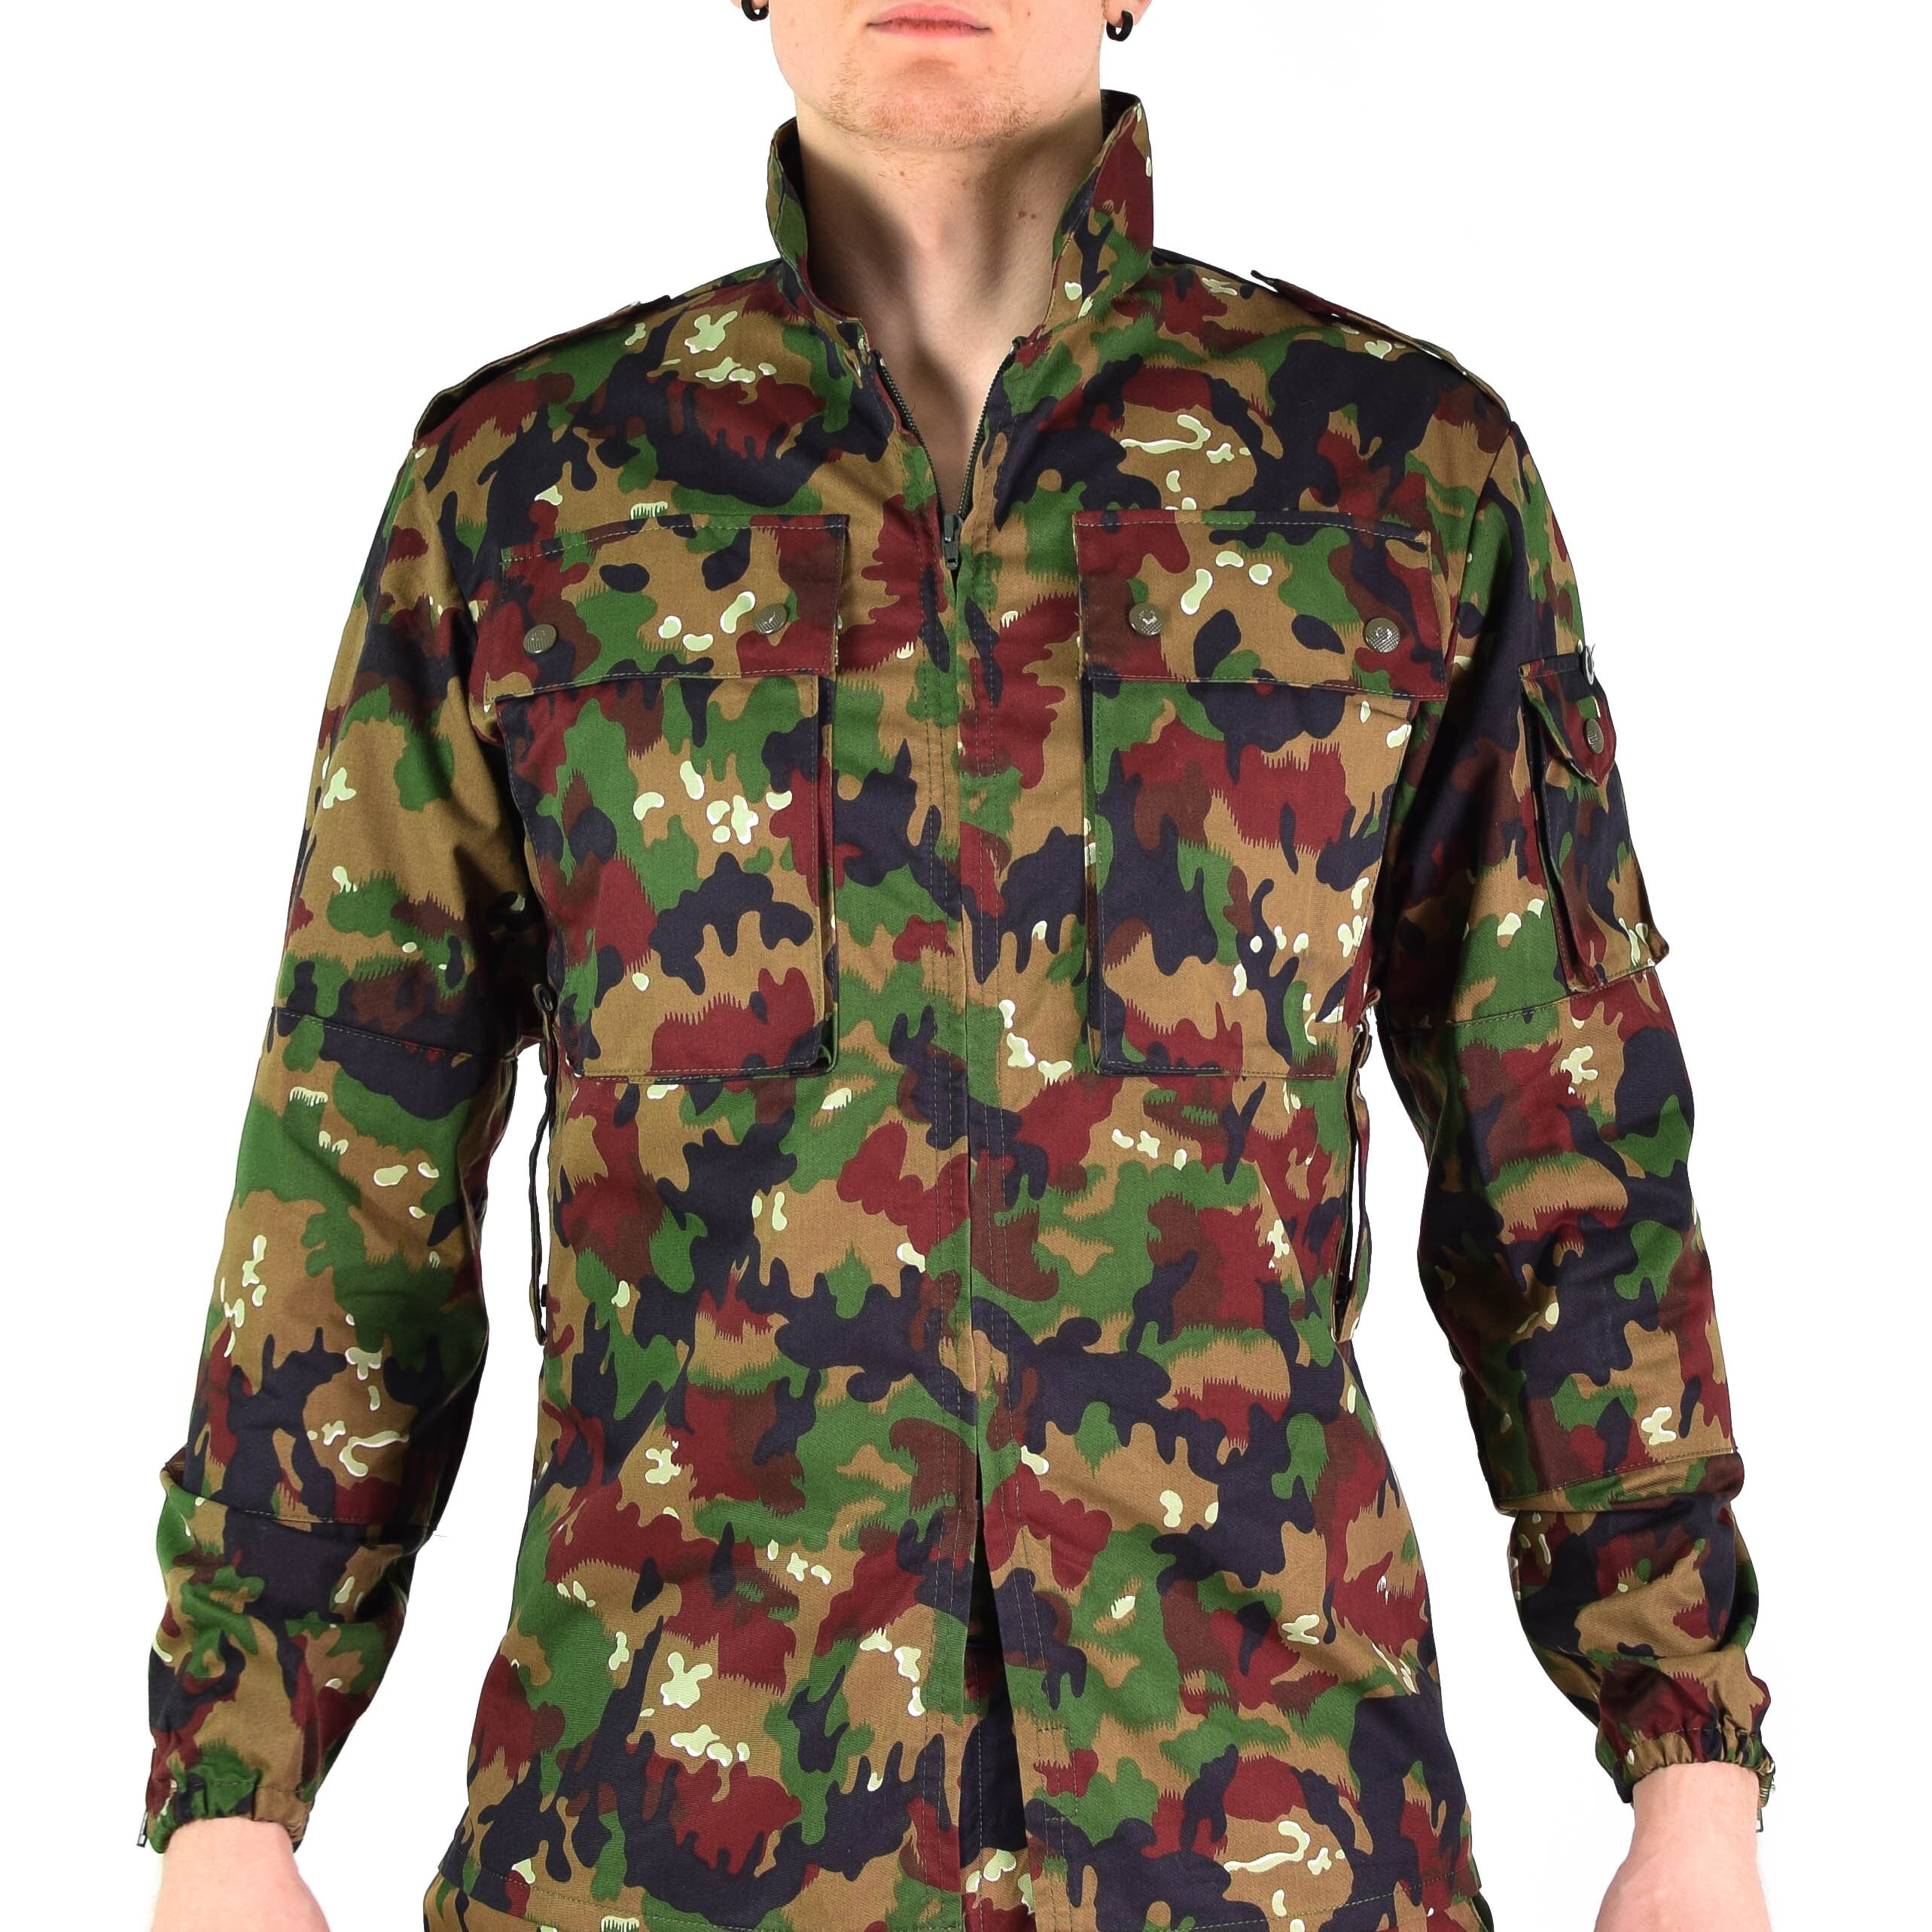 Swiss 'Alpenflage' Camo Load Carrying Combat Jacket - Forces